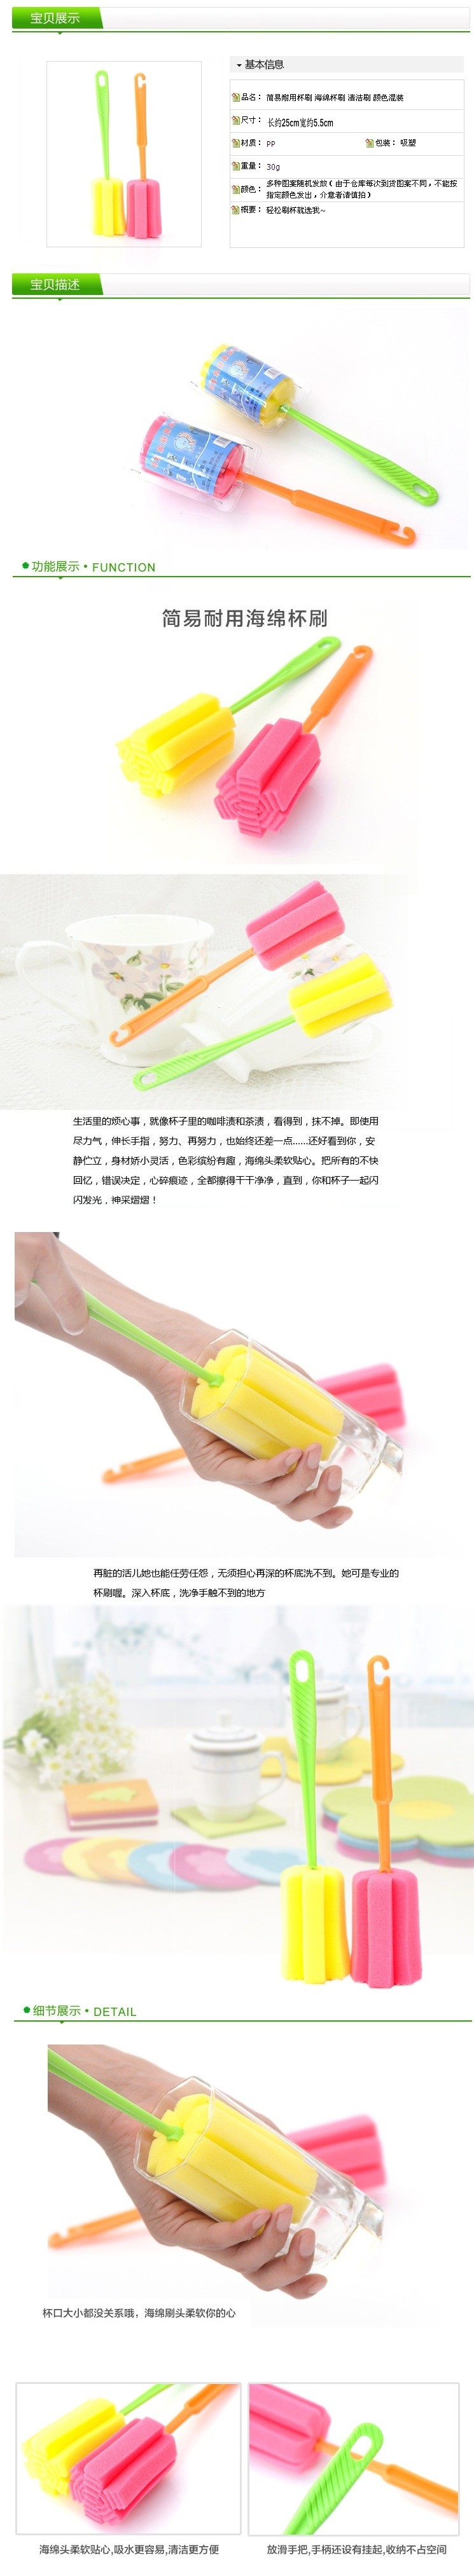 Top Quality Cheap Uesful Sponge Brush Bottle Cup Glass Washing Cleaning, Kitchen Item Cleaner Tools for Dish